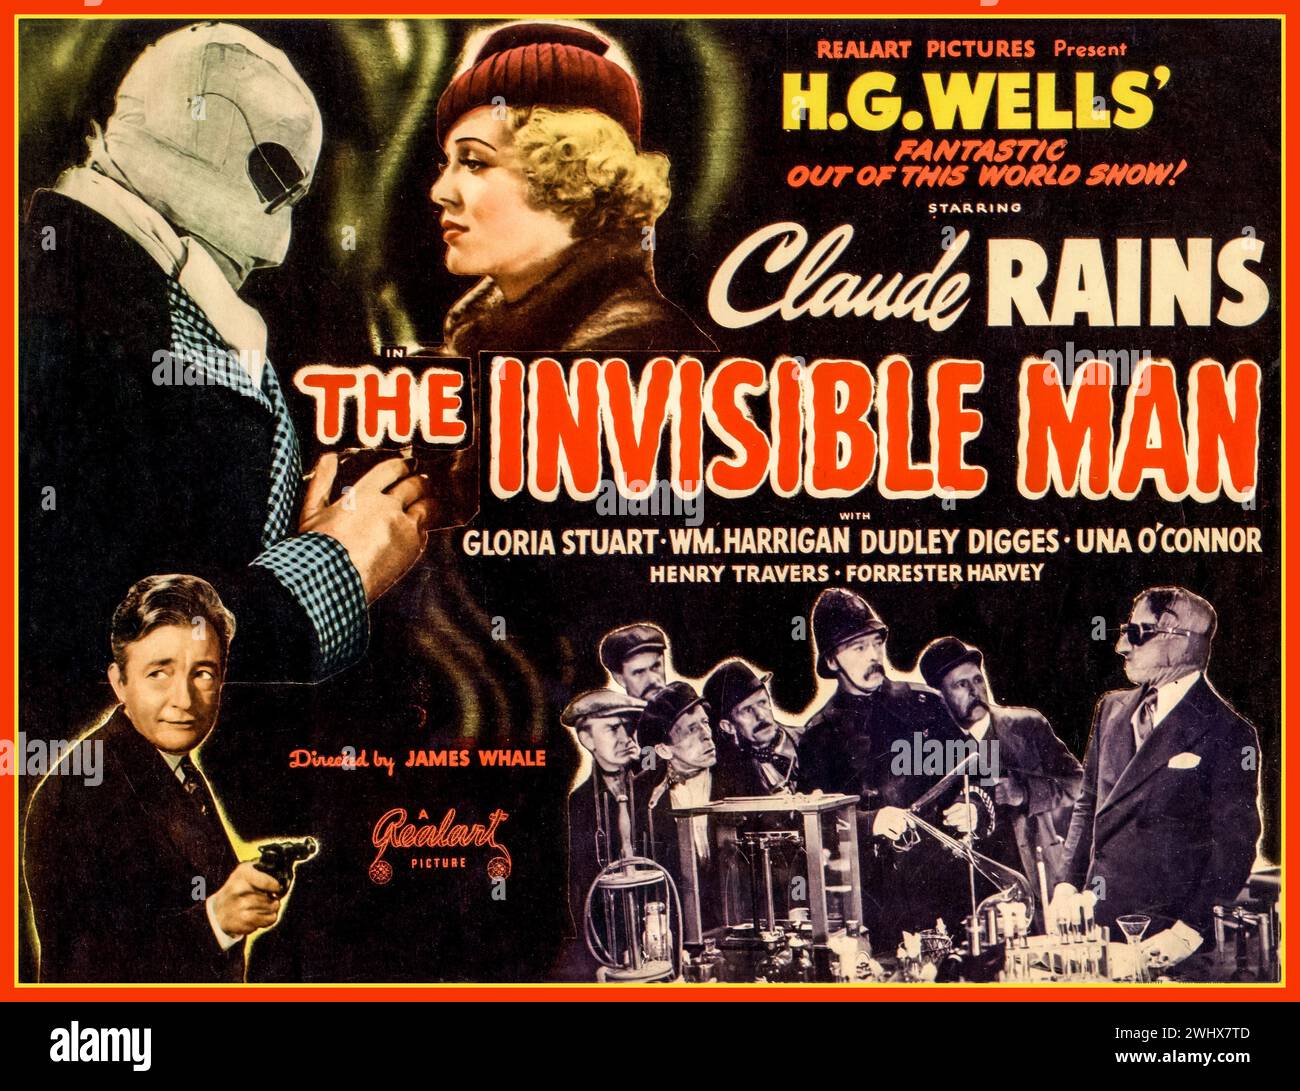 The Invisible Man, vintage movie poster, 1933 American science fiction horror film directed by James Whale based on H. G. Wells' 1897 novel, The Invisible Man, produced by REALART PICTURES, and starring Gloria Stuart, Claude Rains and William Harrigan. The film involves a Dr. Jack Griffin (Rains) who is covered in bandages and has his eyes obscured by dark glasses, the result of a secret experiment that makes him invisible. Realart Pictures Stock Photo